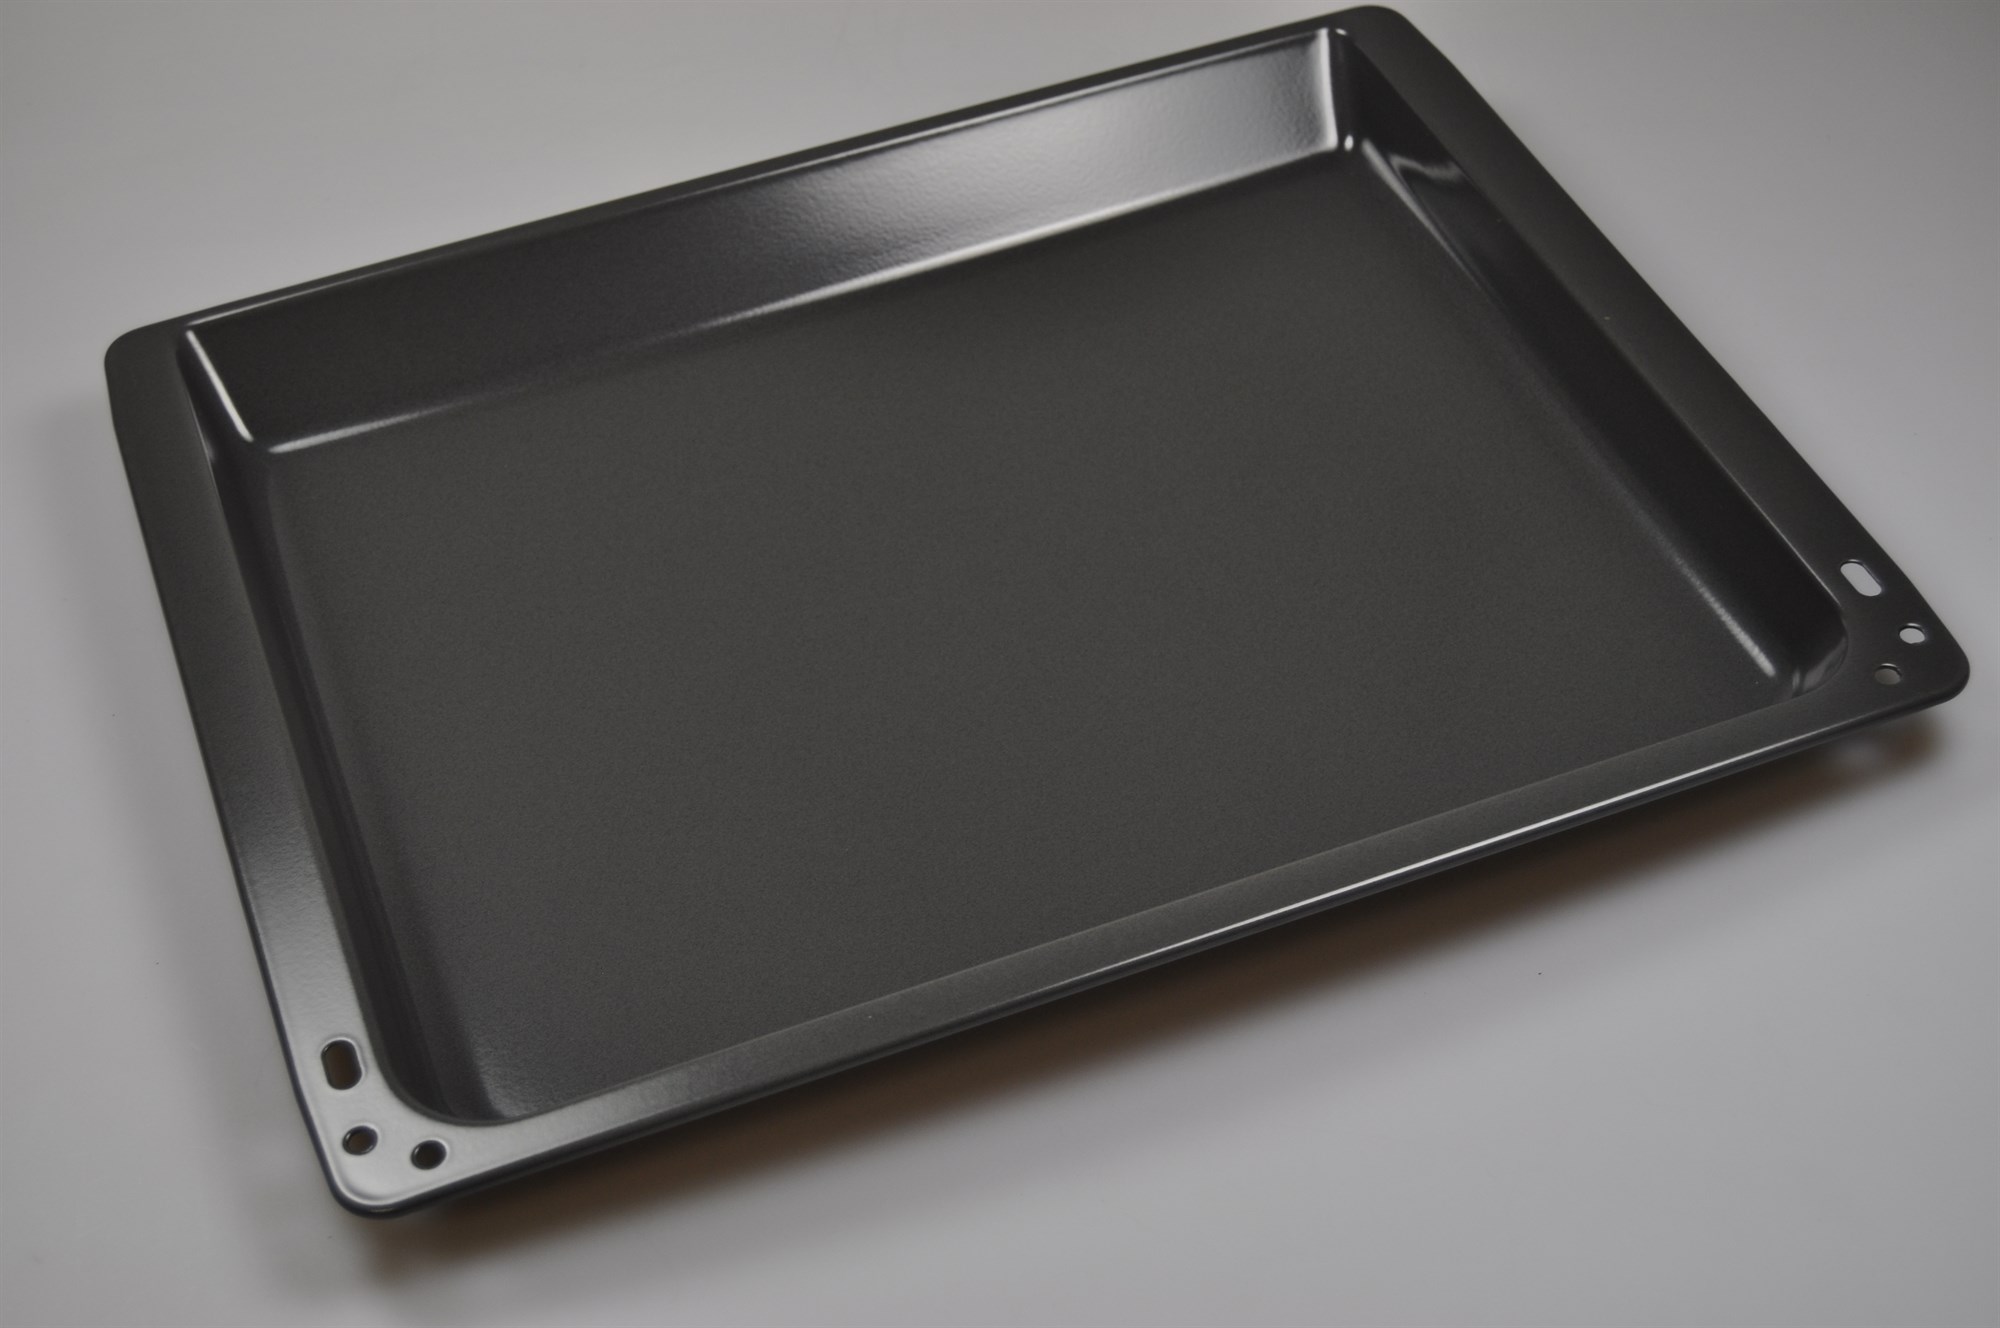 Oven baking tray, Siemens cooker & hobs - 40 mm x 465 mm x 375 mm